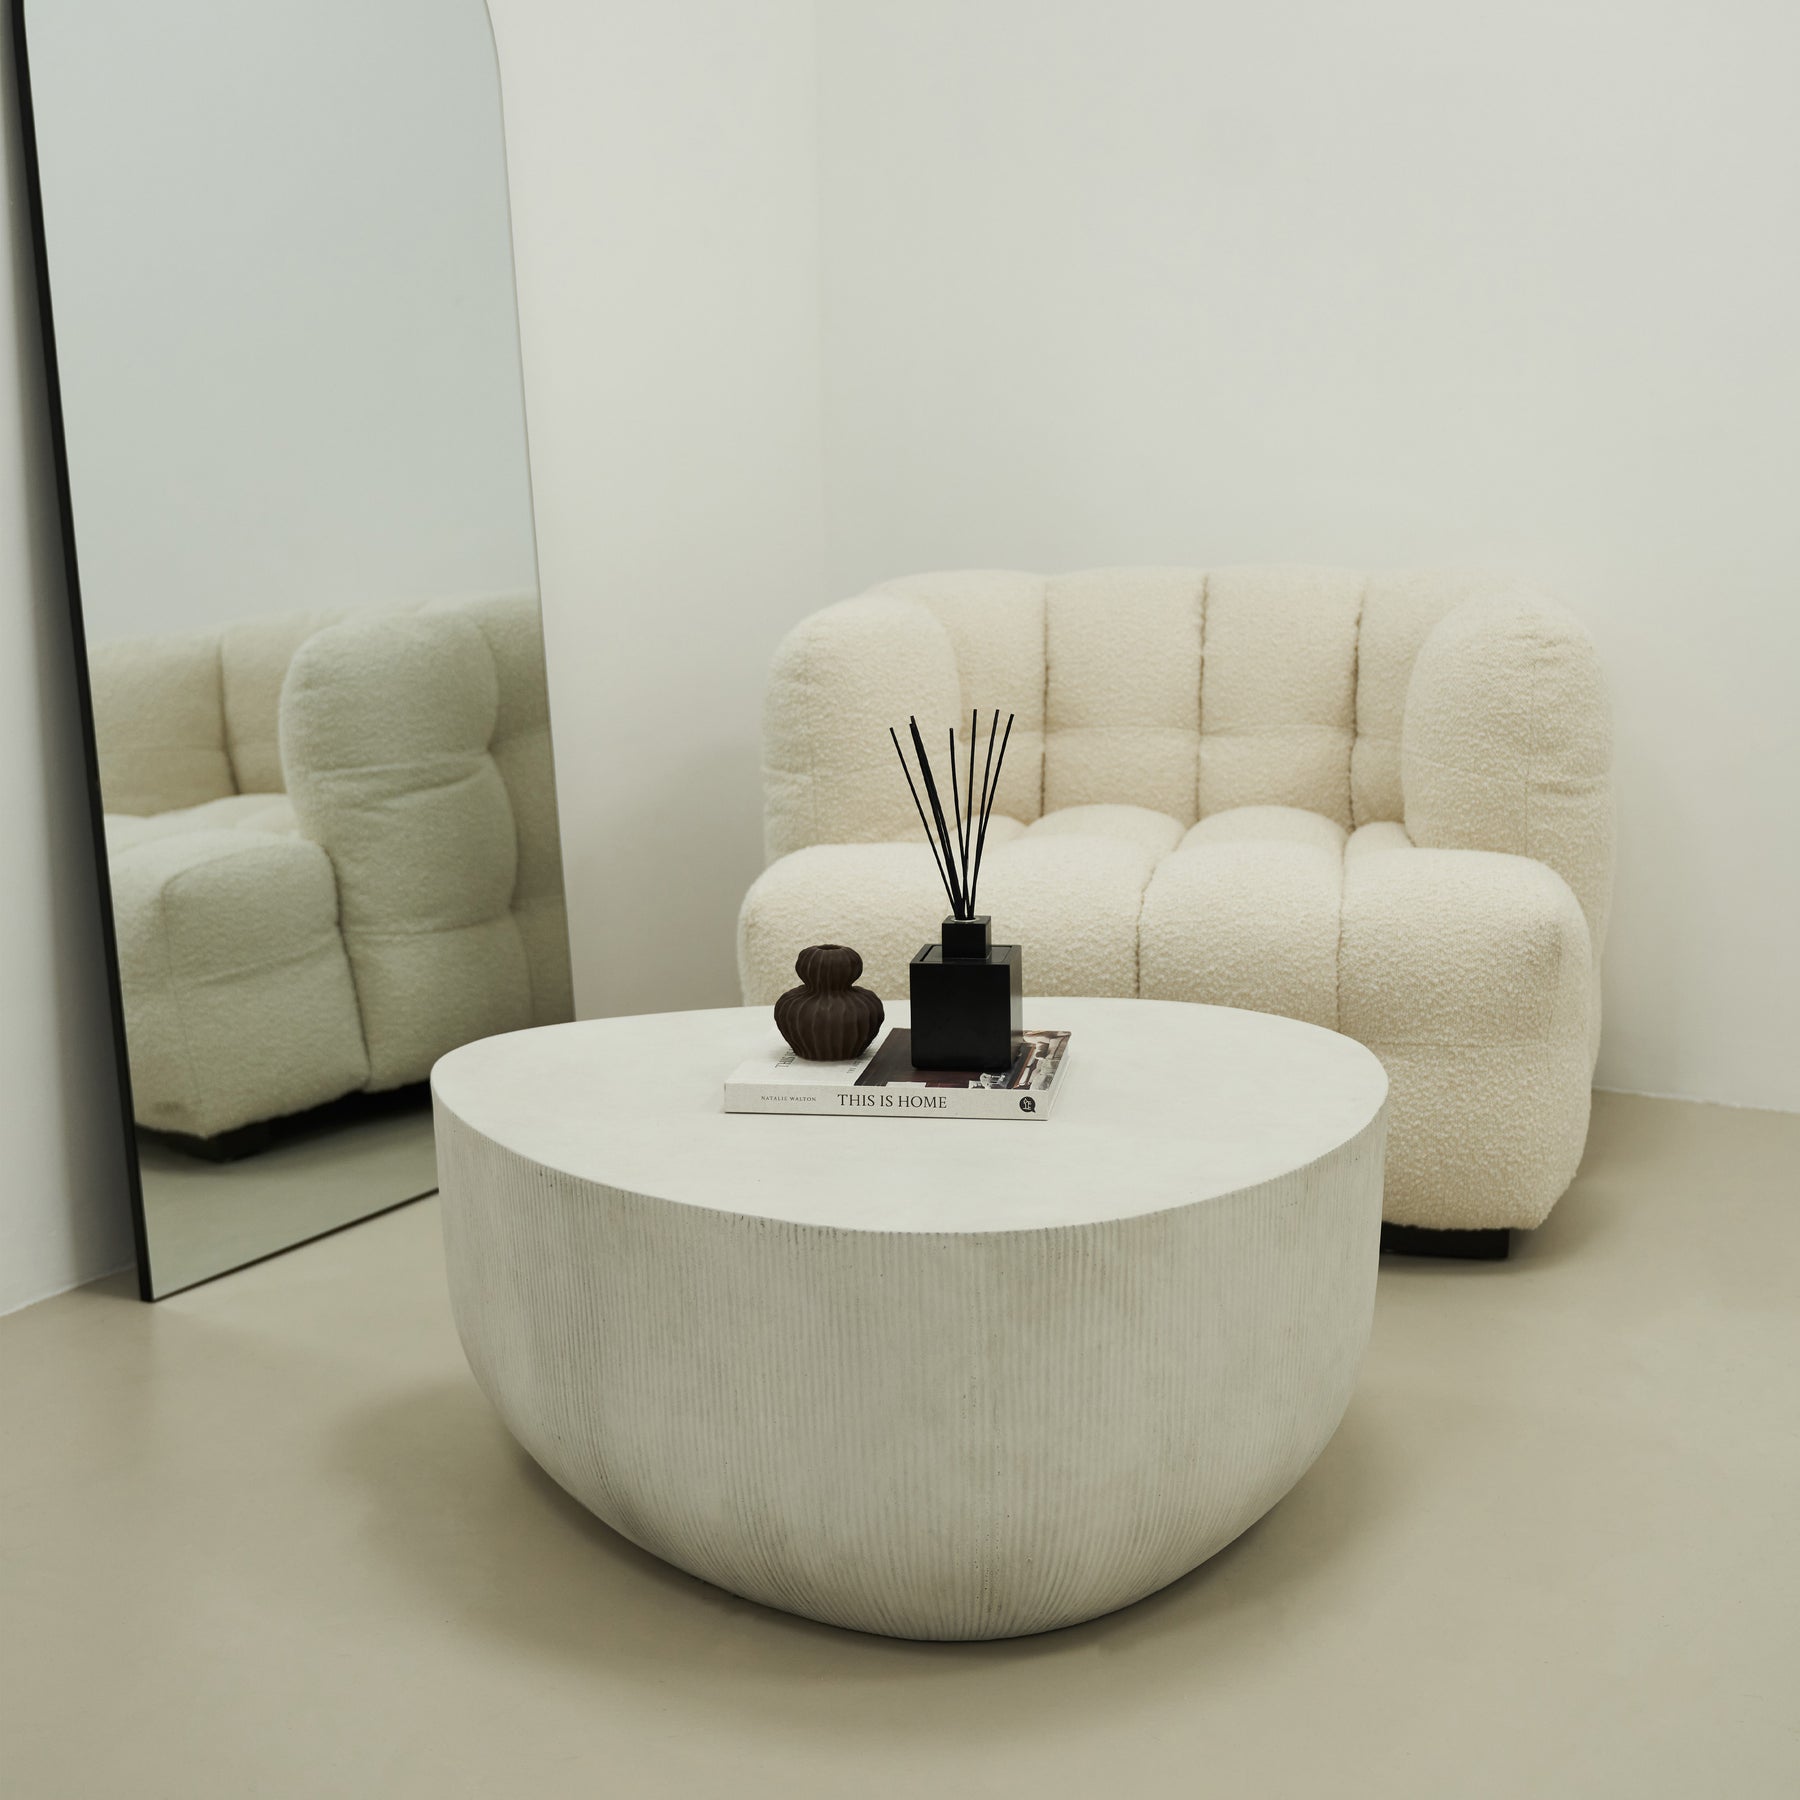 Alternate shot of Minimal Concrete Irregular Shaped Coffee Table Large in typical setting